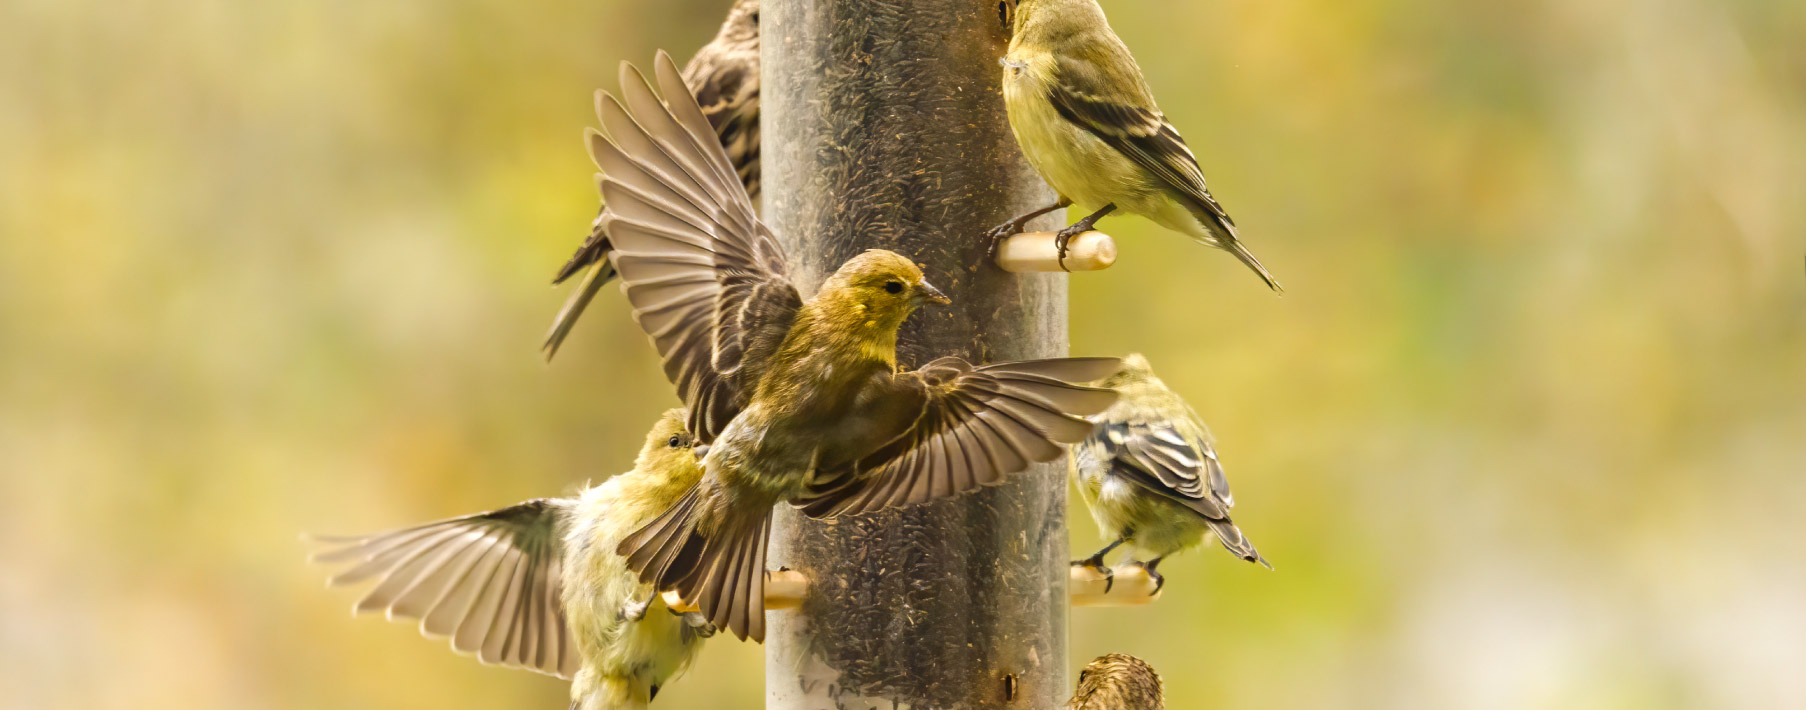 Four yellow finches visit a birdfeeder that is filled with black seed.